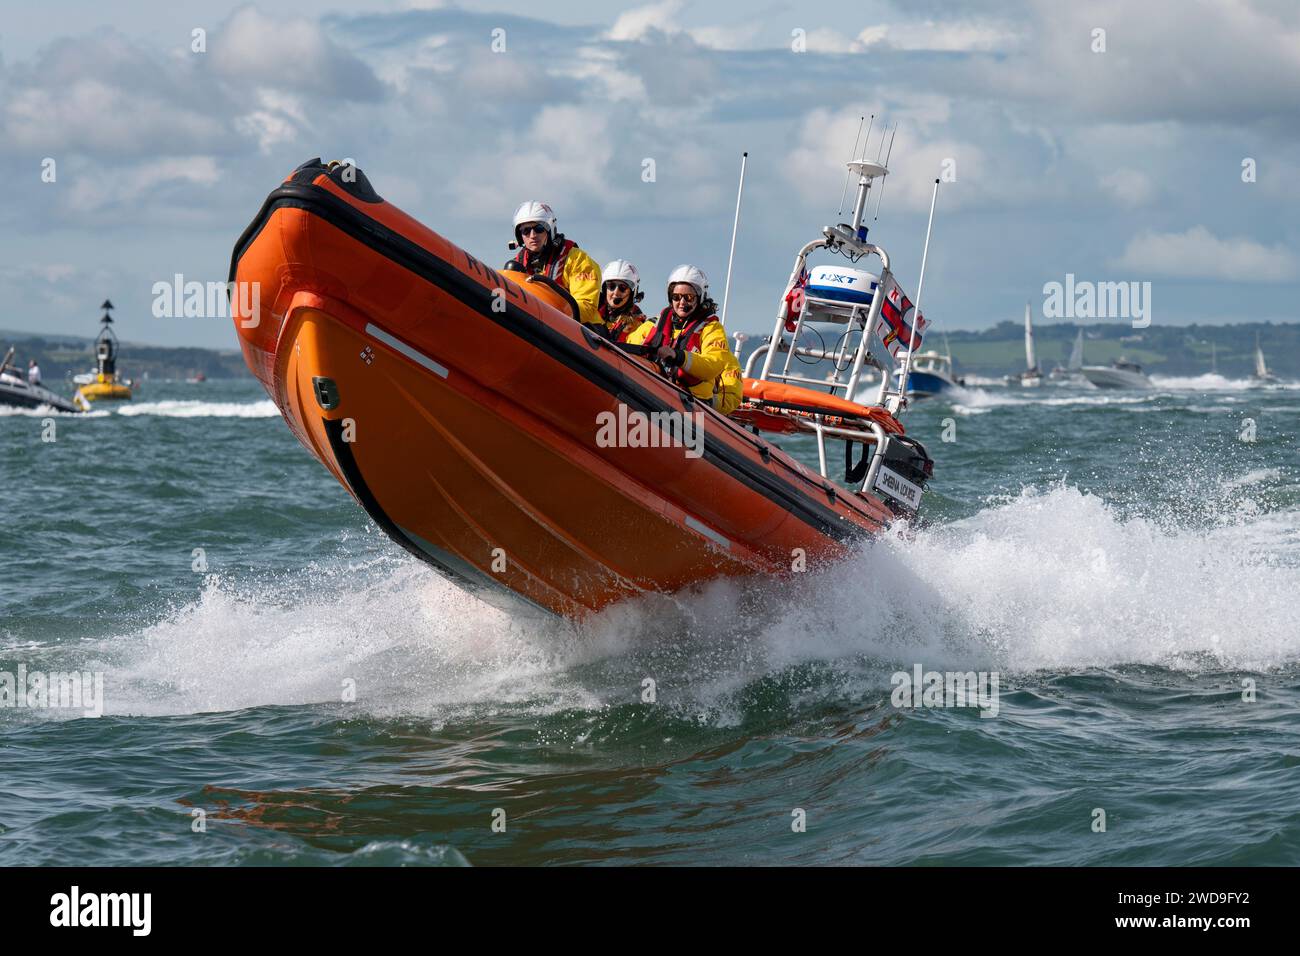 The Cowes Inshore Lifeboat Sheena Louise an Atlantic 85 RIB on duty in the Solent off the North coast of the Isle of Wight during a power boat race Stock Photo